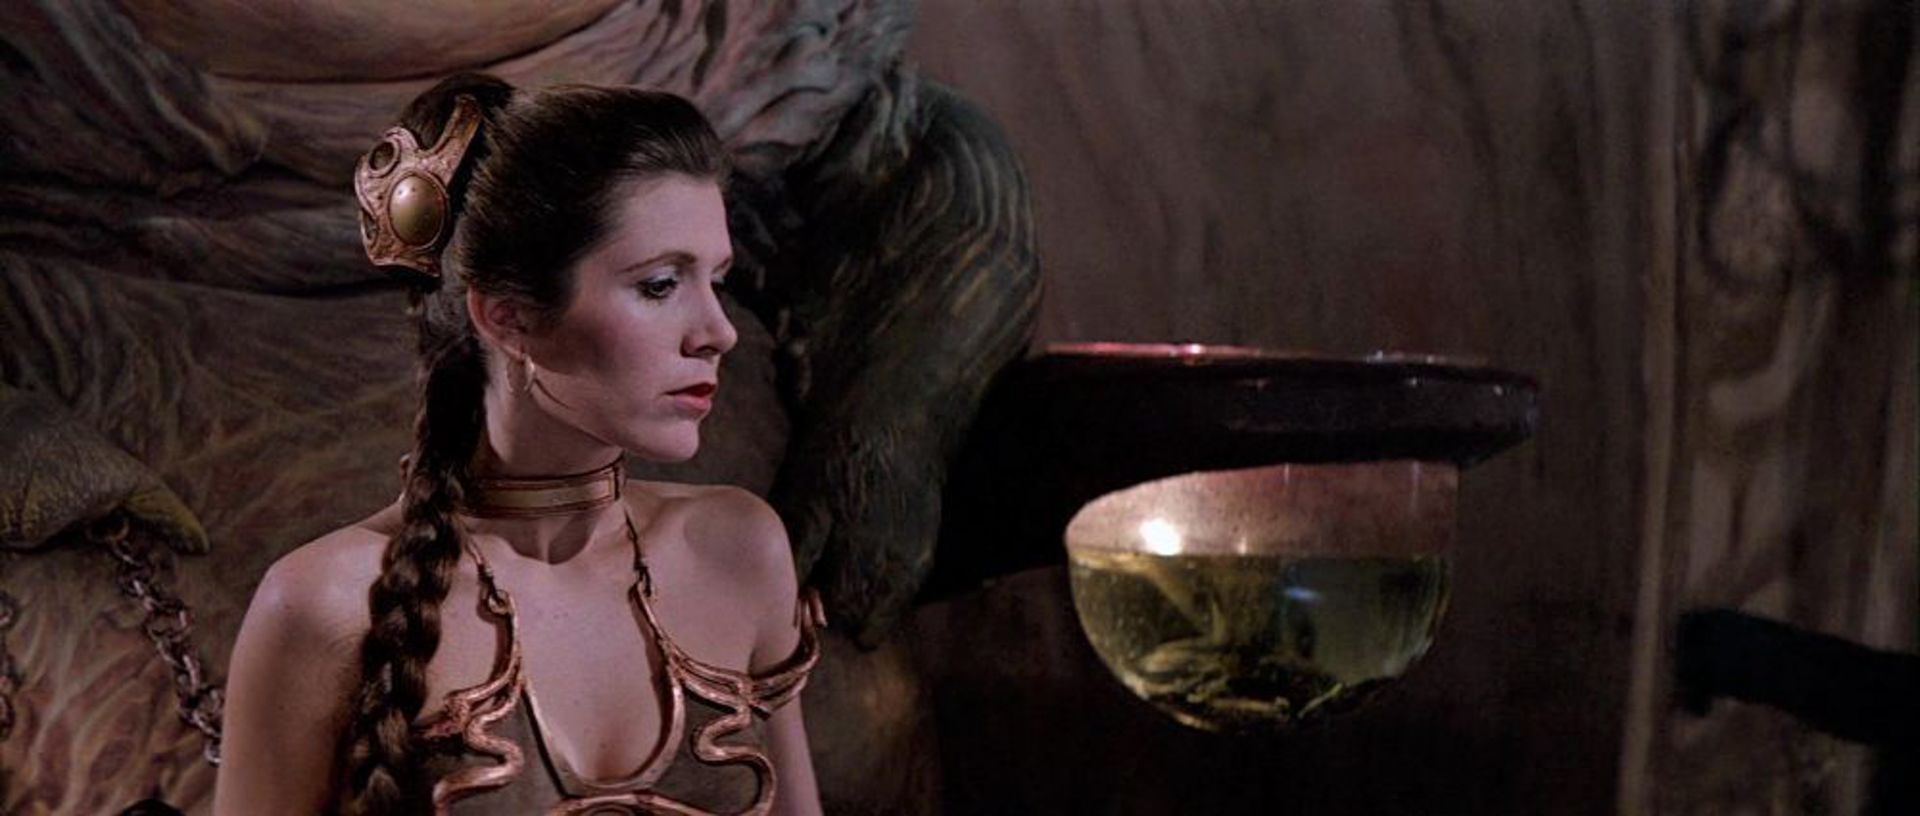 STAR WARS - RETURN OF THE JEDI | CARRIE FISHER "PRINCESS LEIA ORGANA" JABBA THE HUTT SLAVE COSTUME P - Image 52 of 54